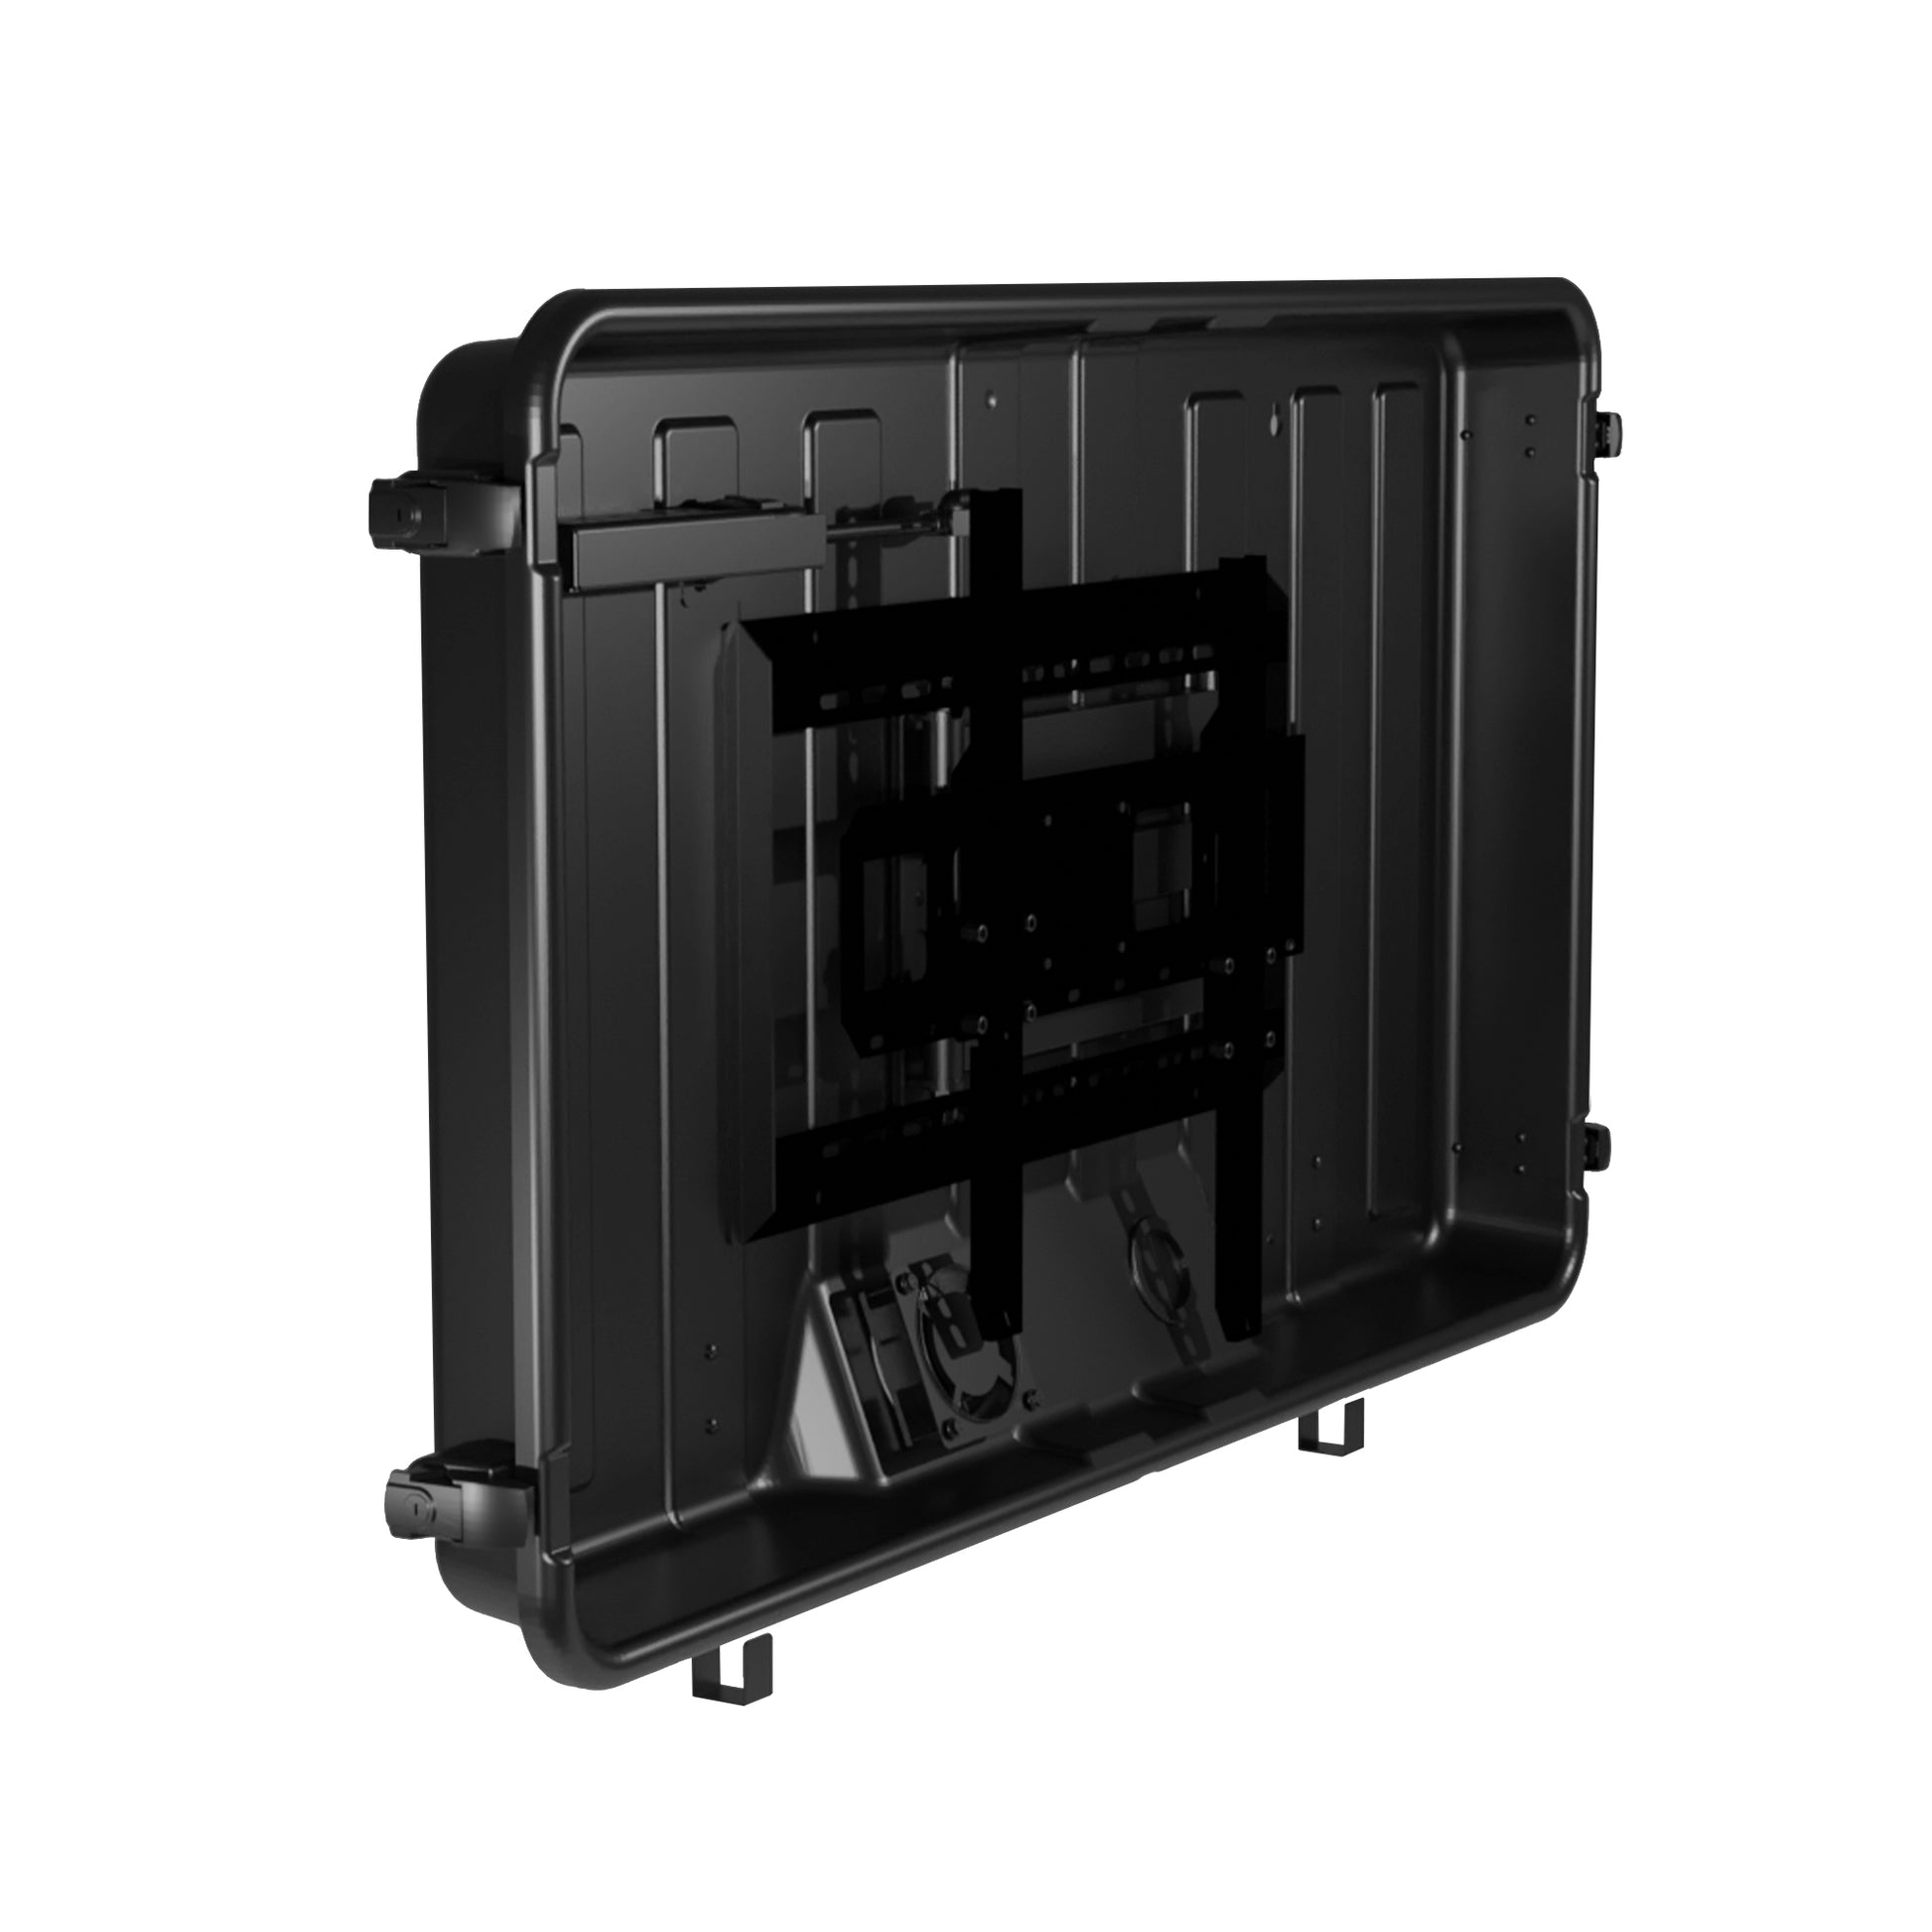 Storm Shell Outdoor Weatherproof TV Enclosure  with ariticulating arm and mounting hardware. Fits up to 44" TV  with the cover removed